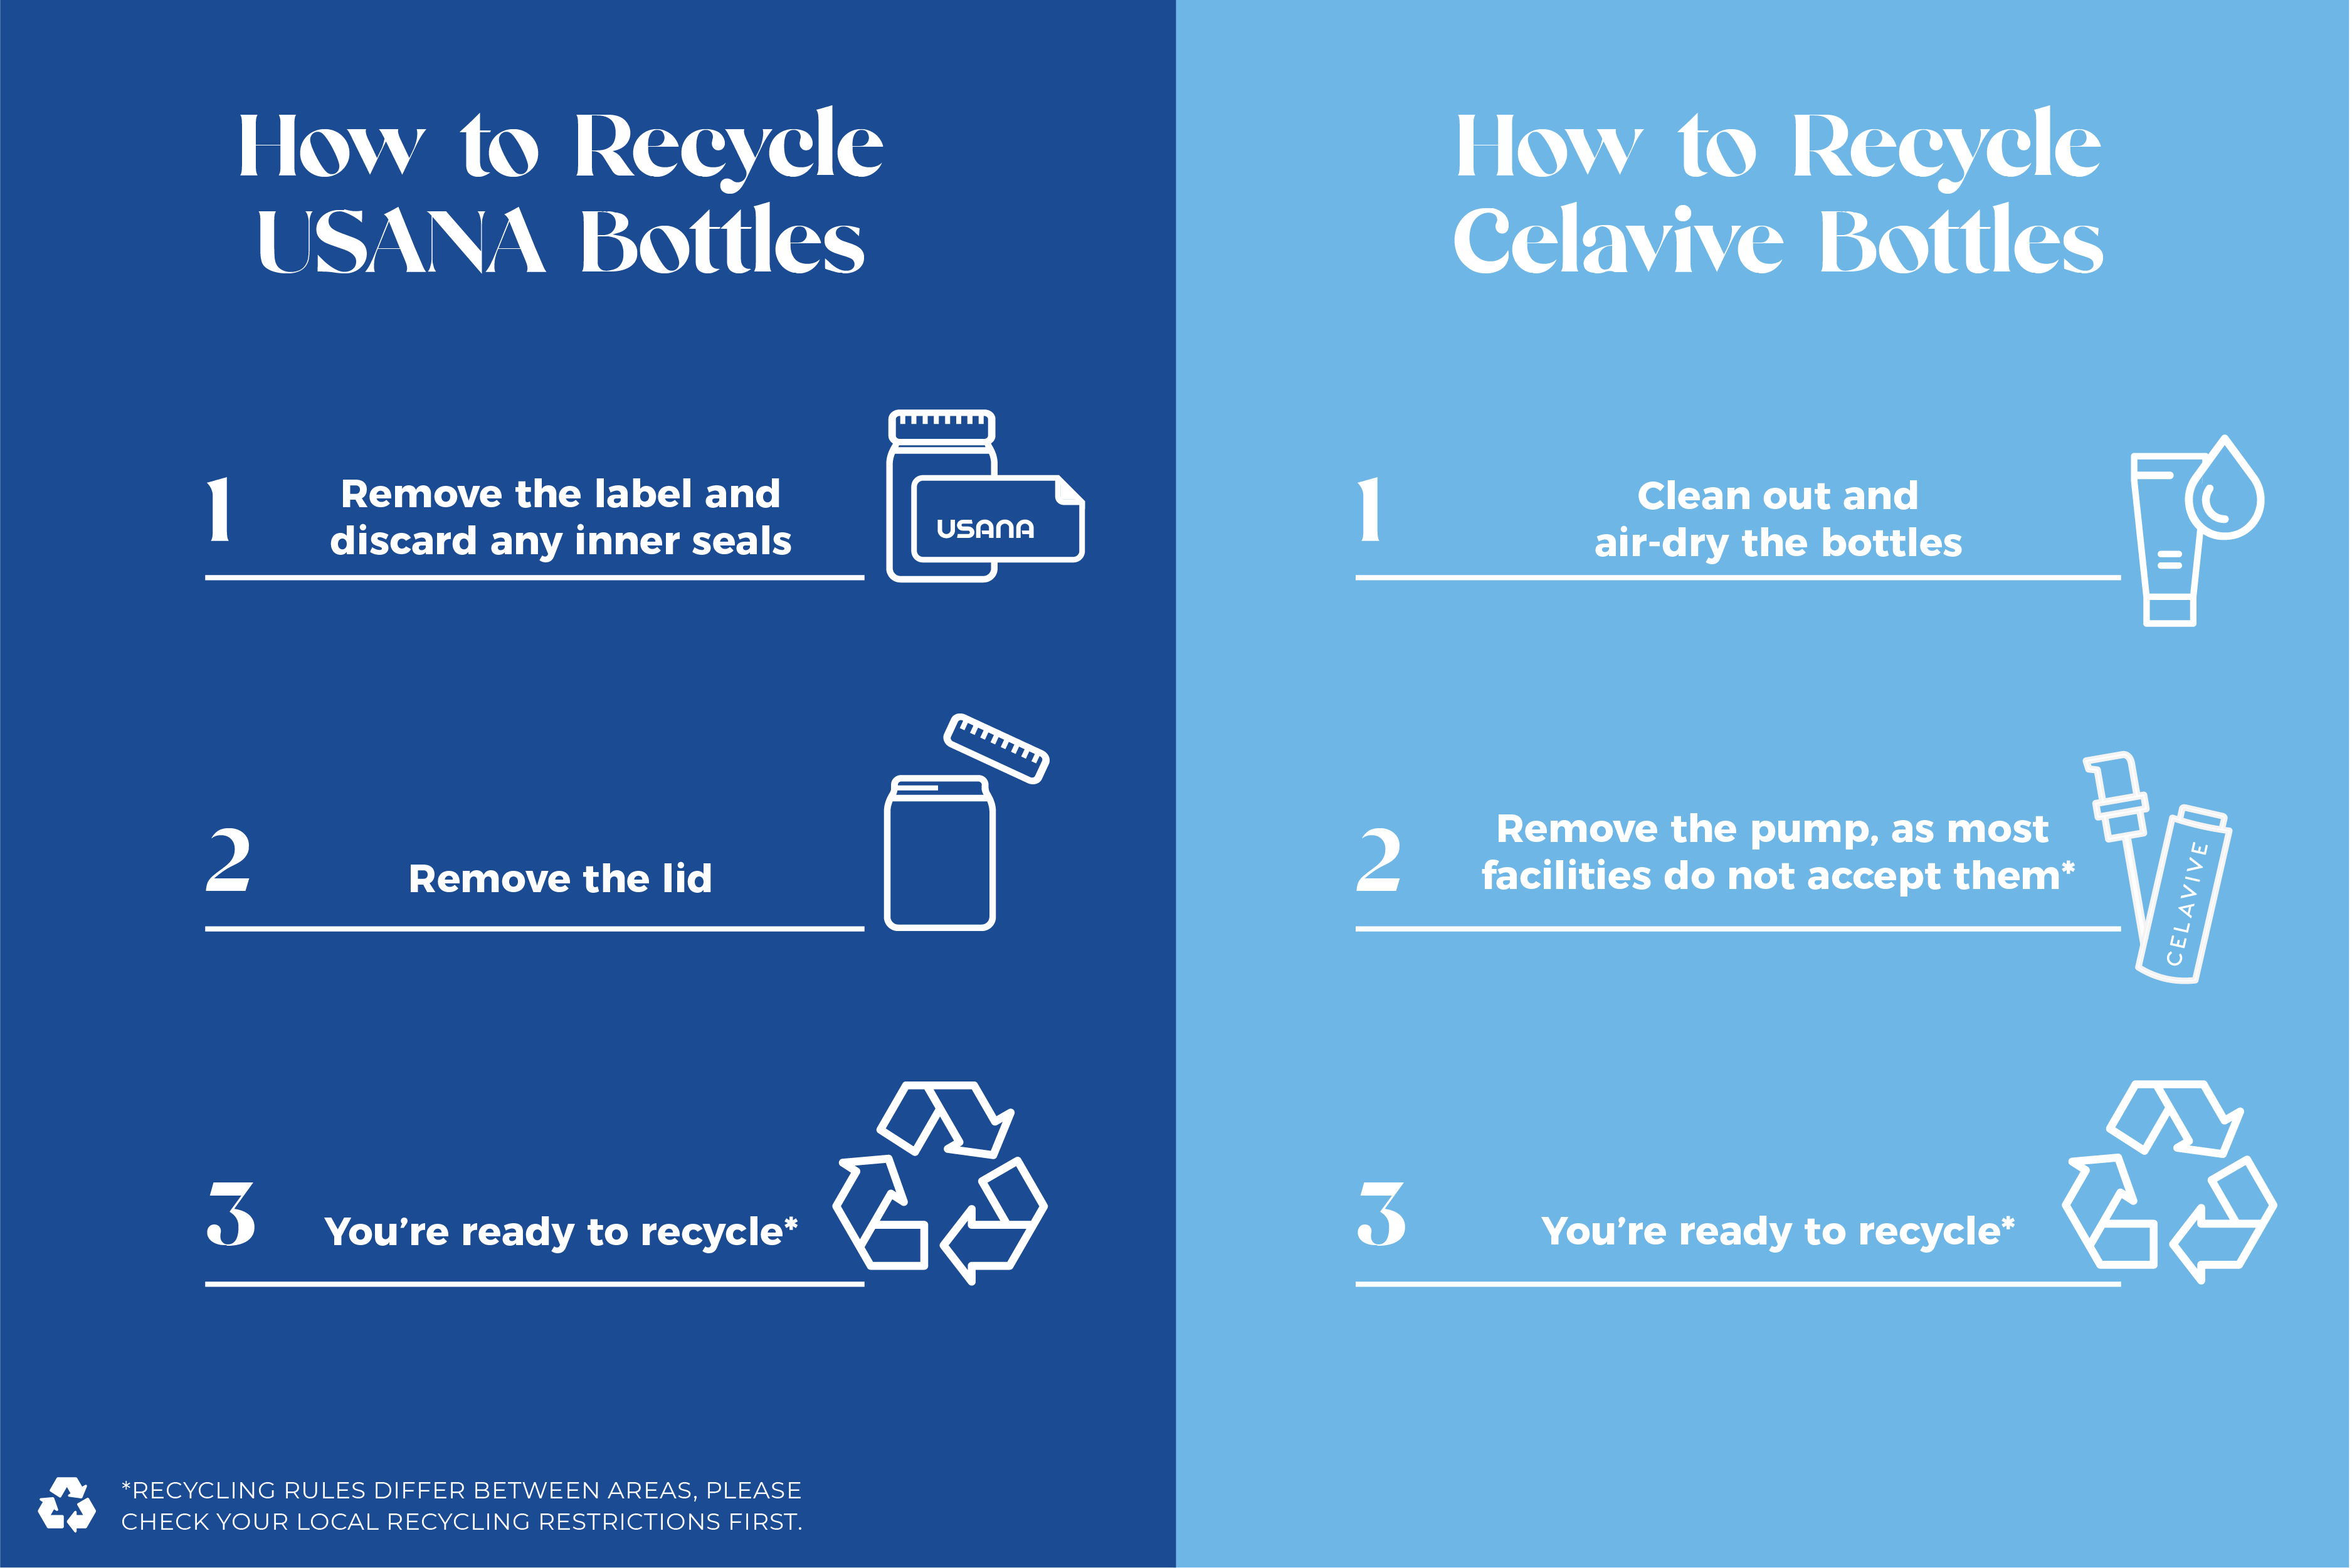 How to Recycle USANA bottles